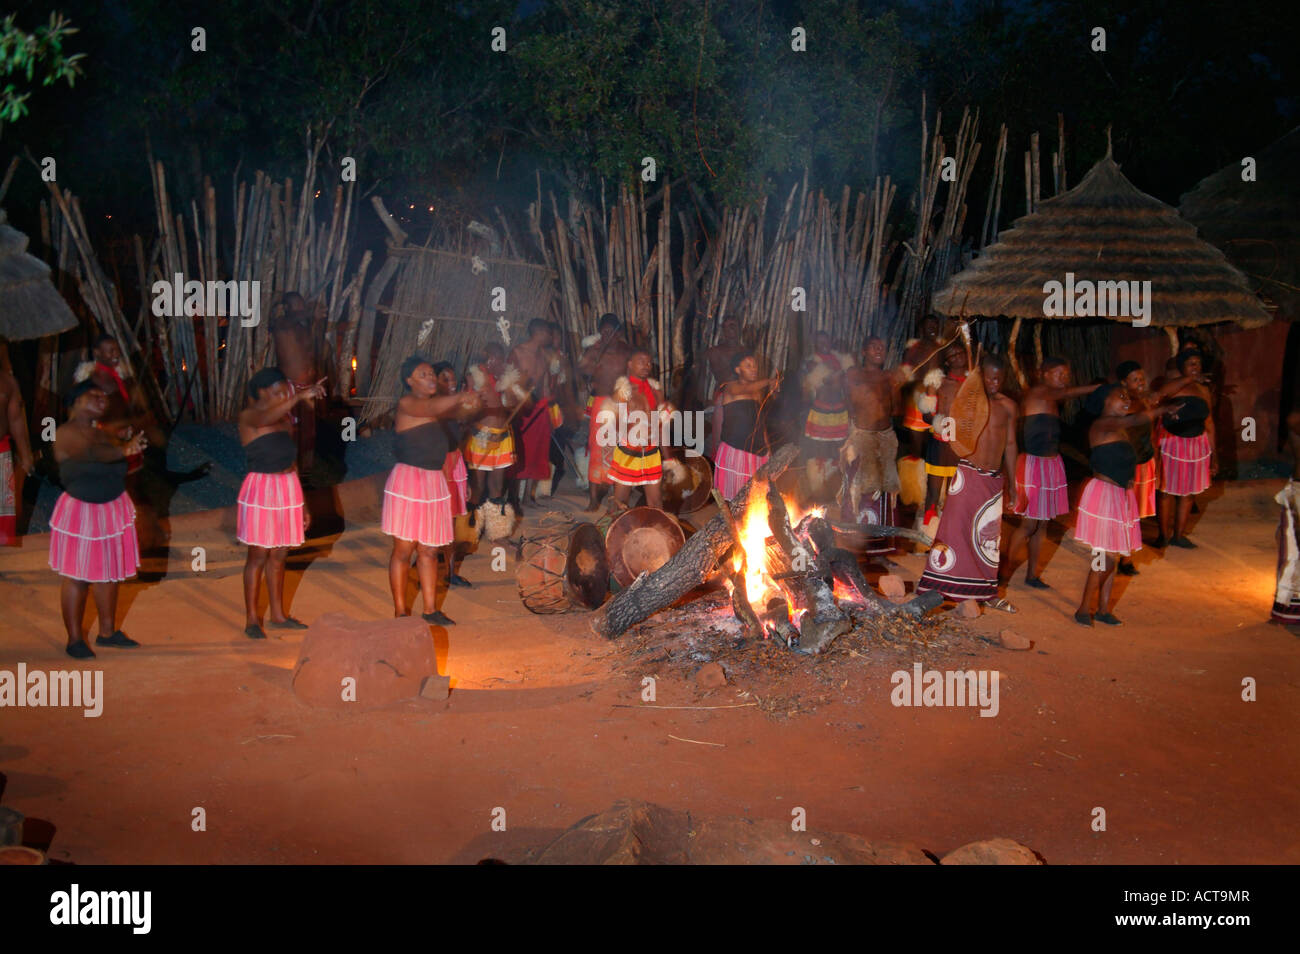 An evening dance show presented at the fireside in an outdoor boma at the Shangana cultural village Hazyview South Africa Stock Photo